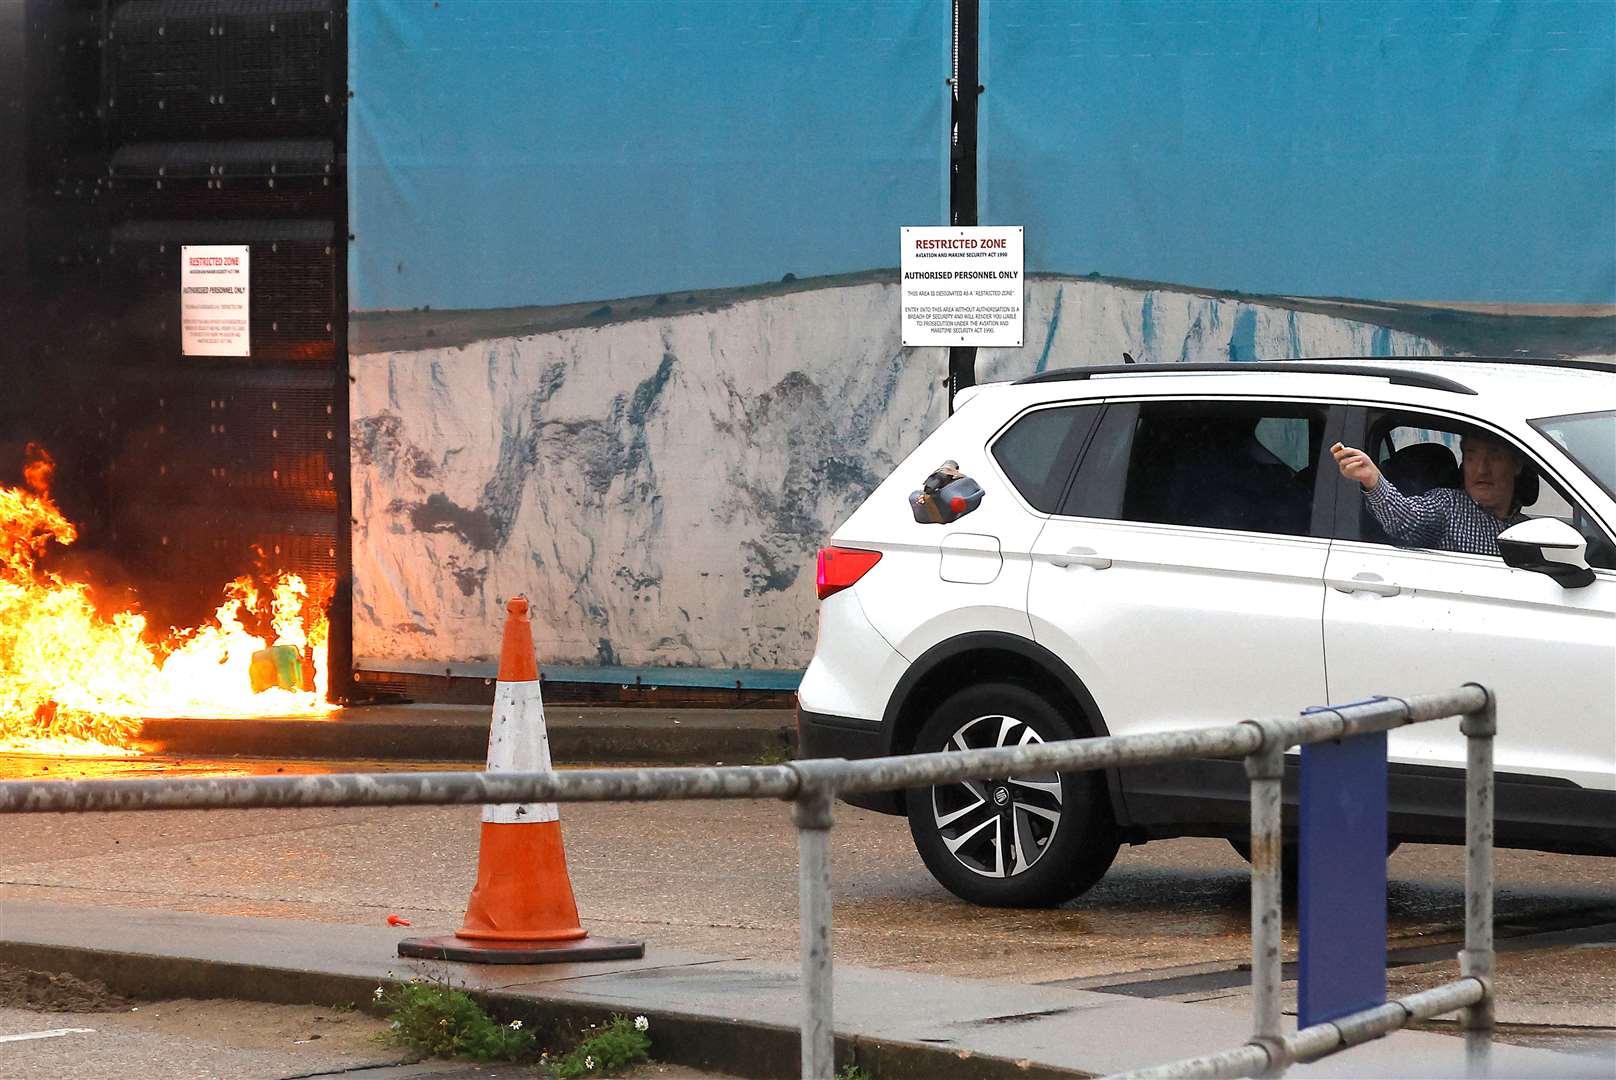 The petrol bomb attack in Dover was caught on camera. Photo: REUTERS/Peter Nicholls